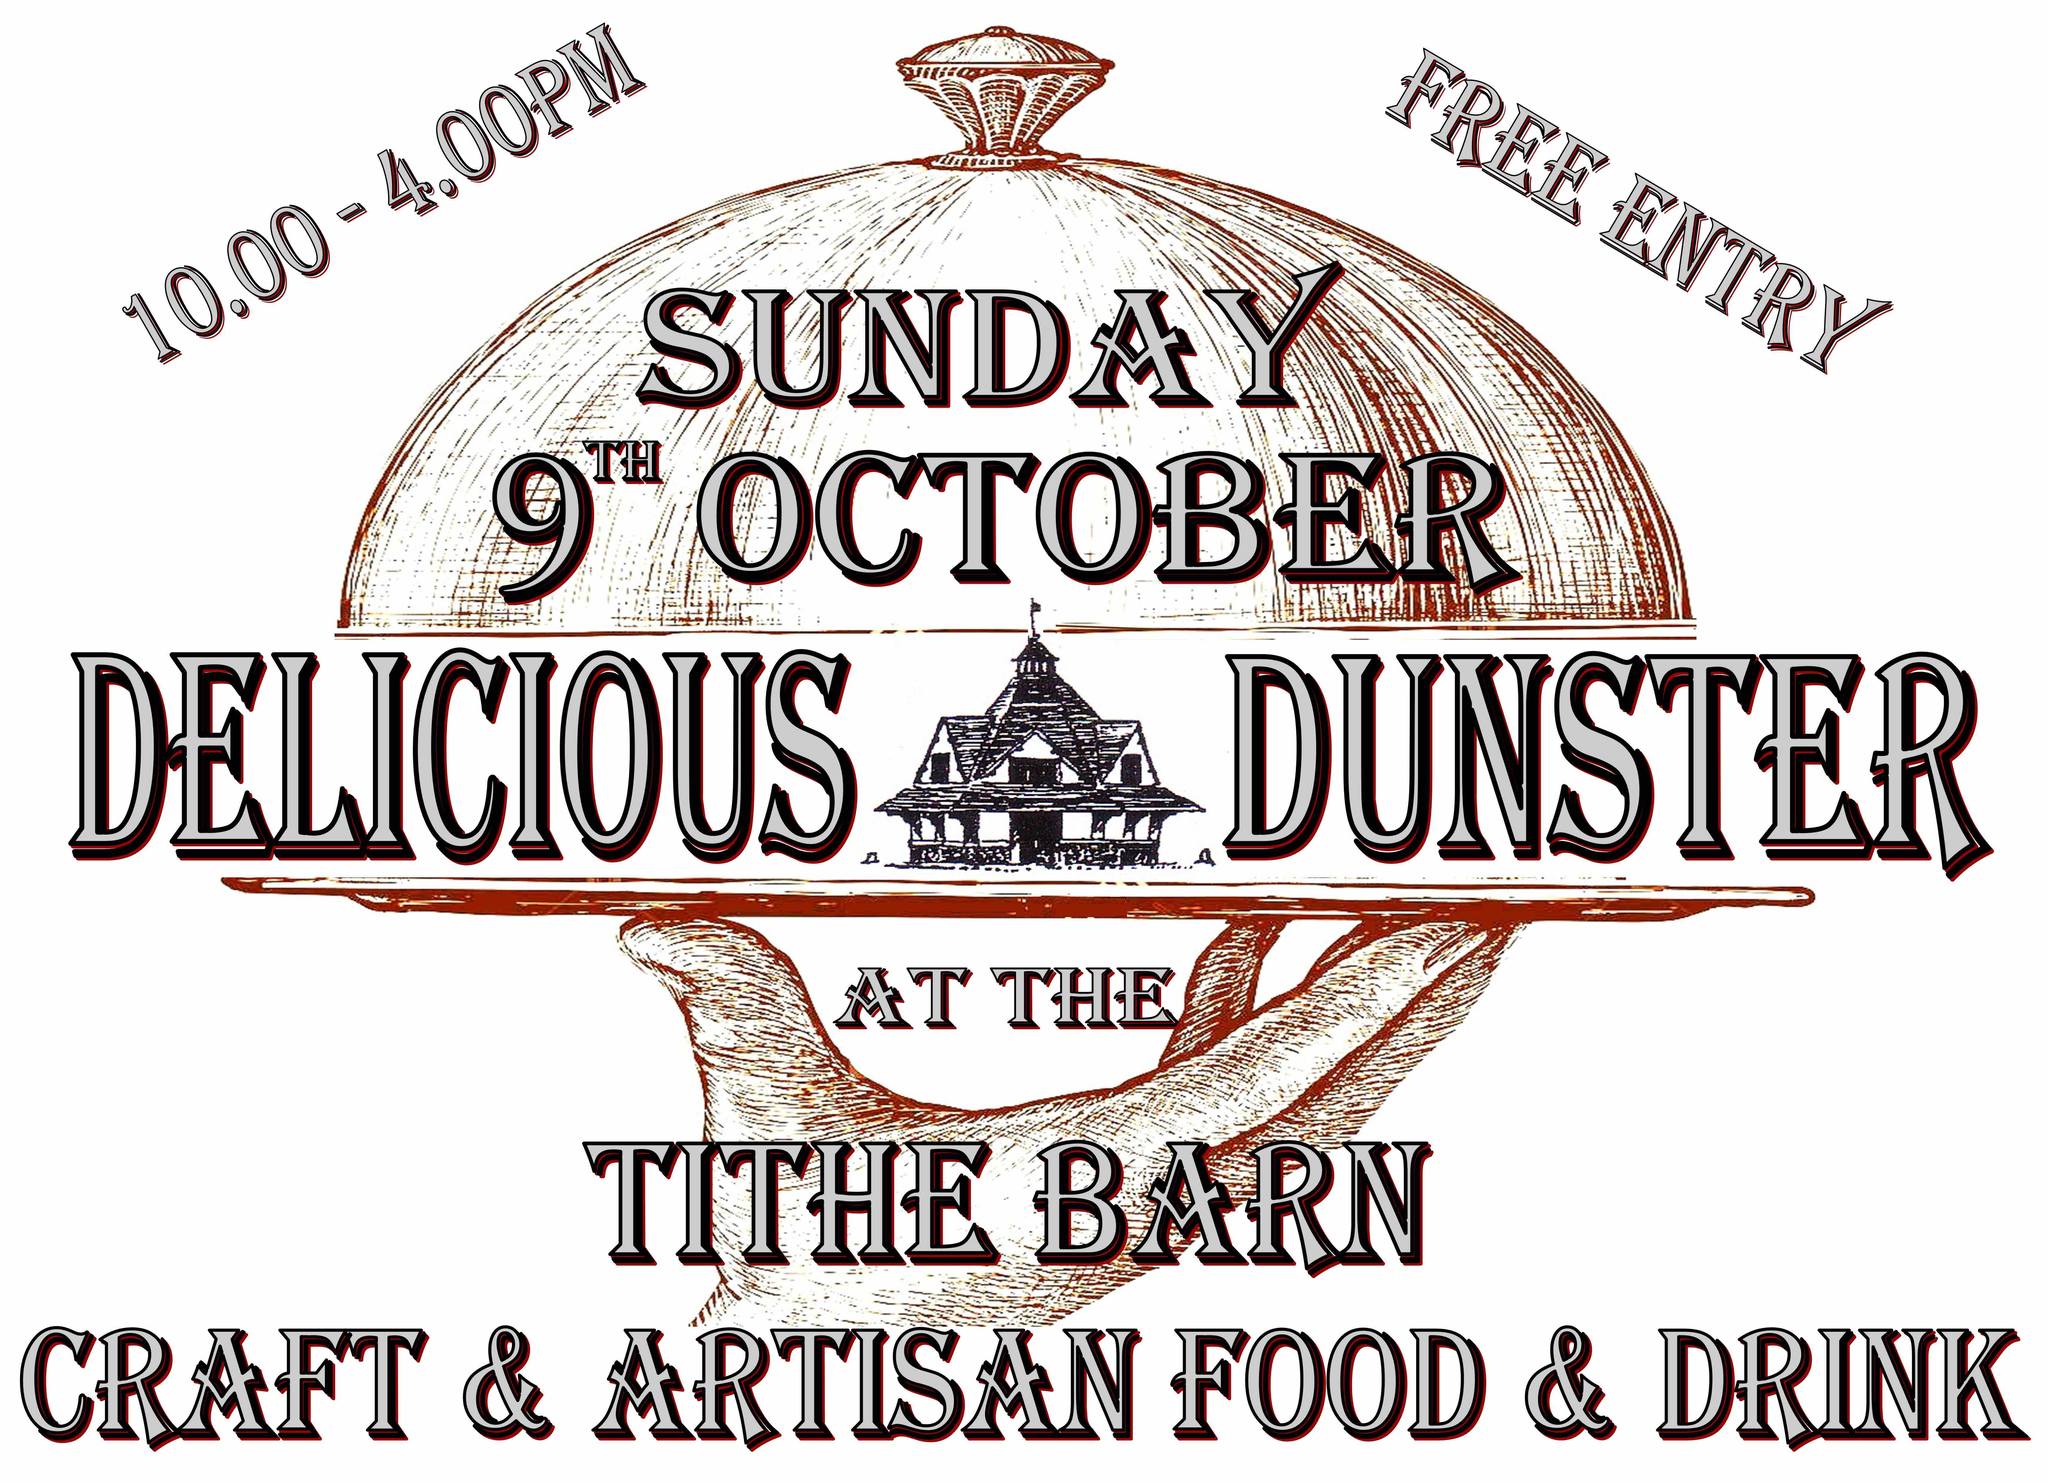 Delicious Dunster at Dunster Tithe Barn Oct